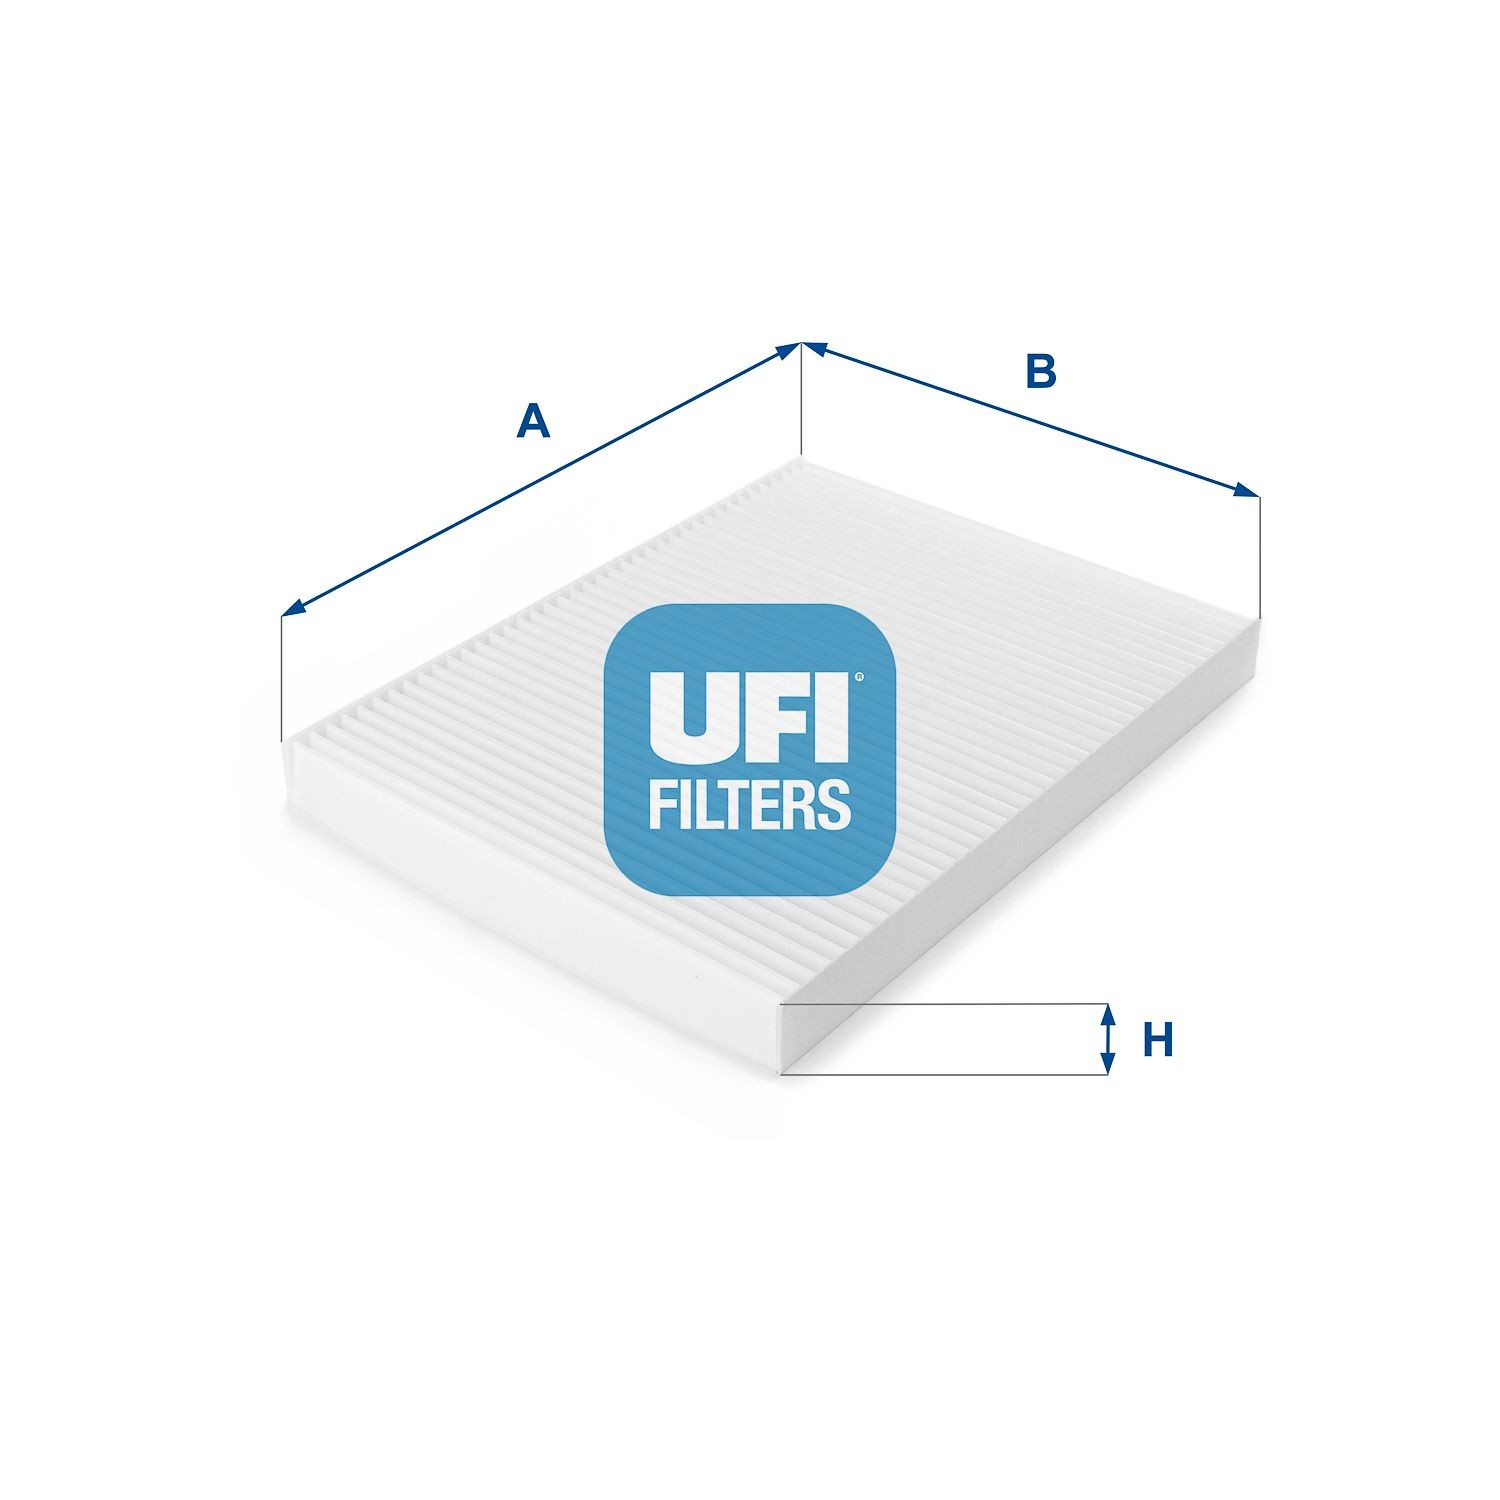 UFI 53.006.00 Air conditioner filter Particulate Filter, 276 mm x 206 mm x 25 mm